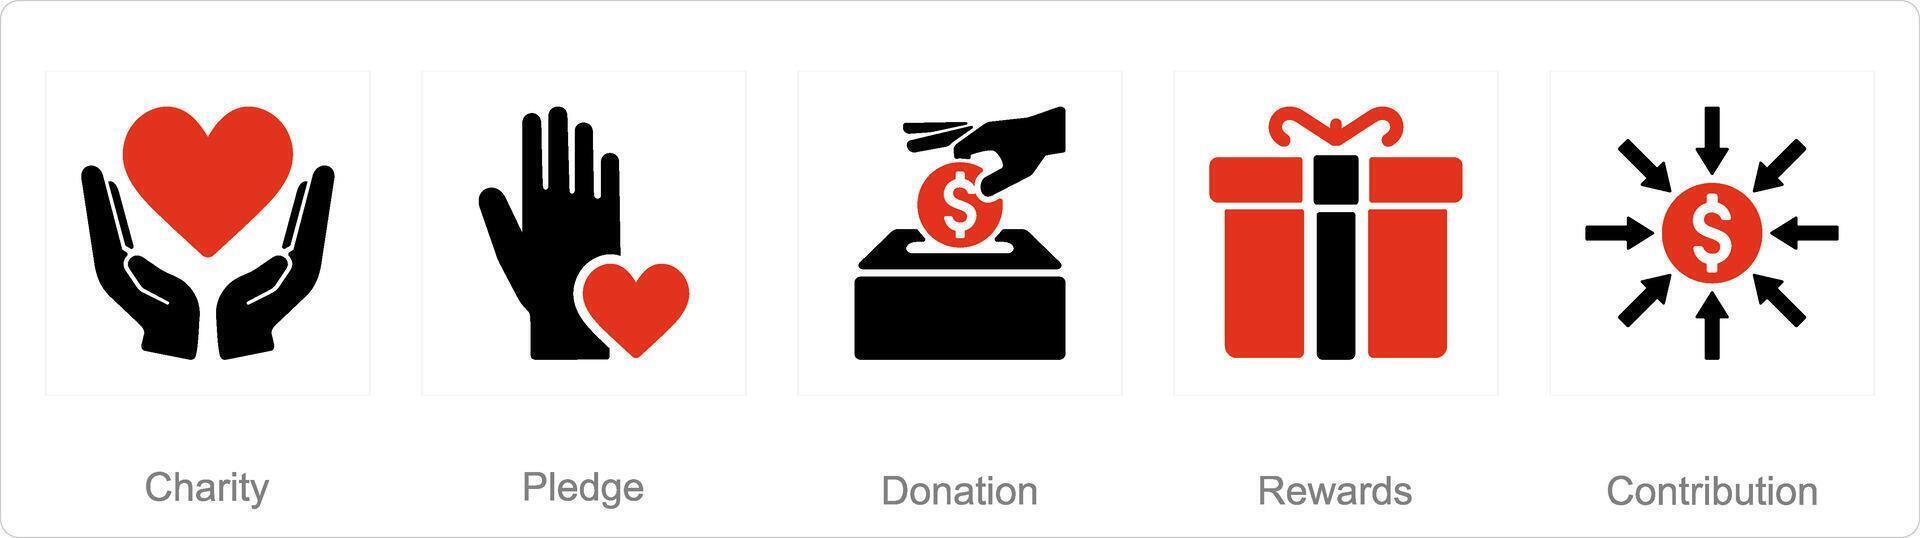 A set of 5 Crowdfunding icons as charity, pledge, donation vector